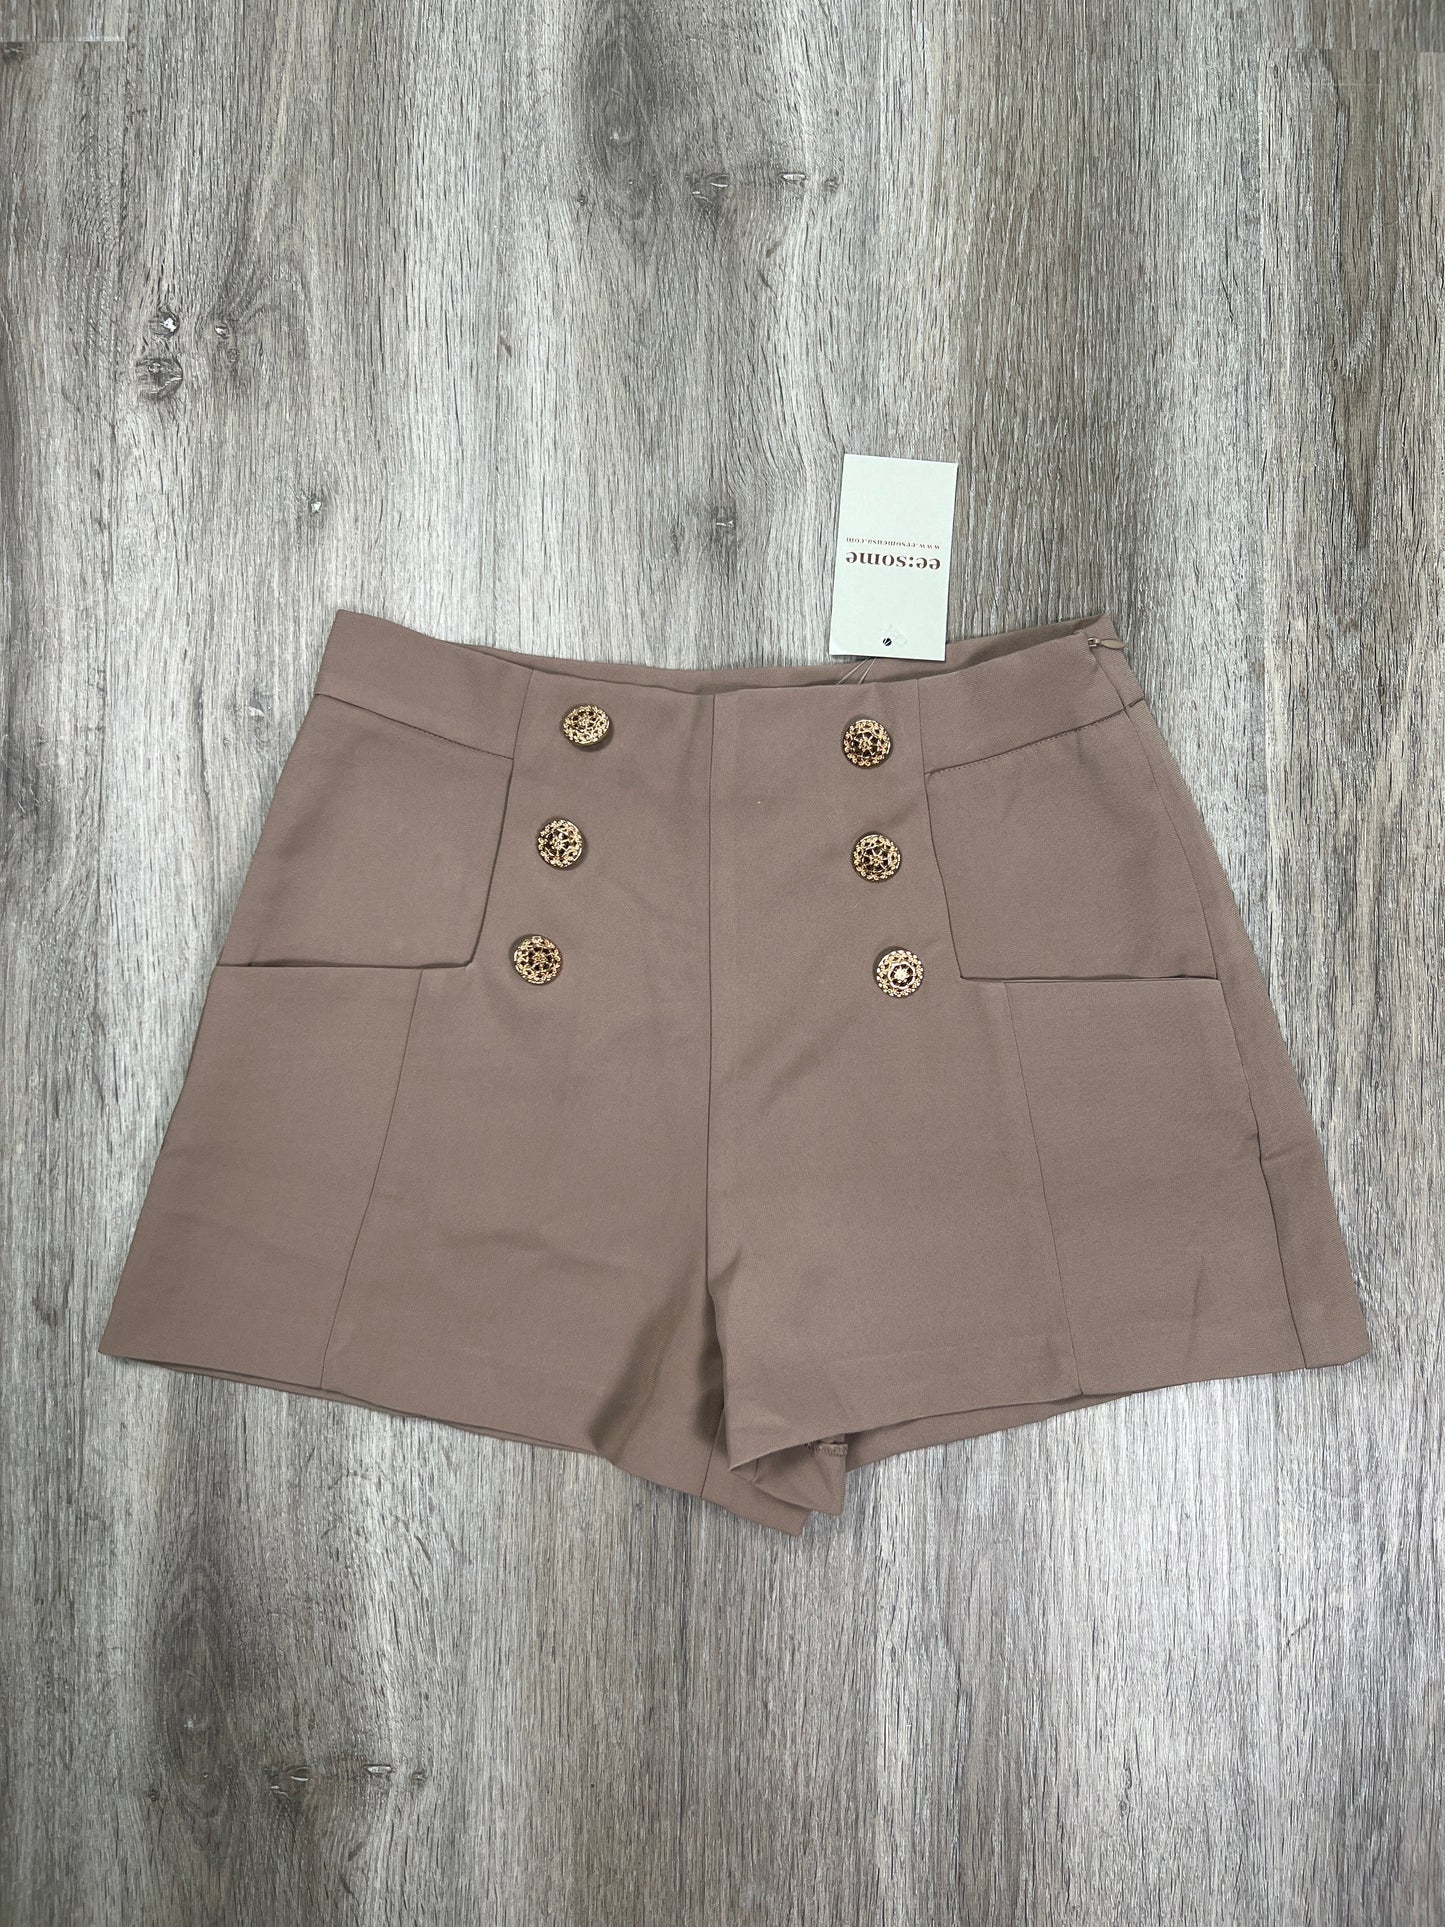 Shorts By Ee Some  Size: S